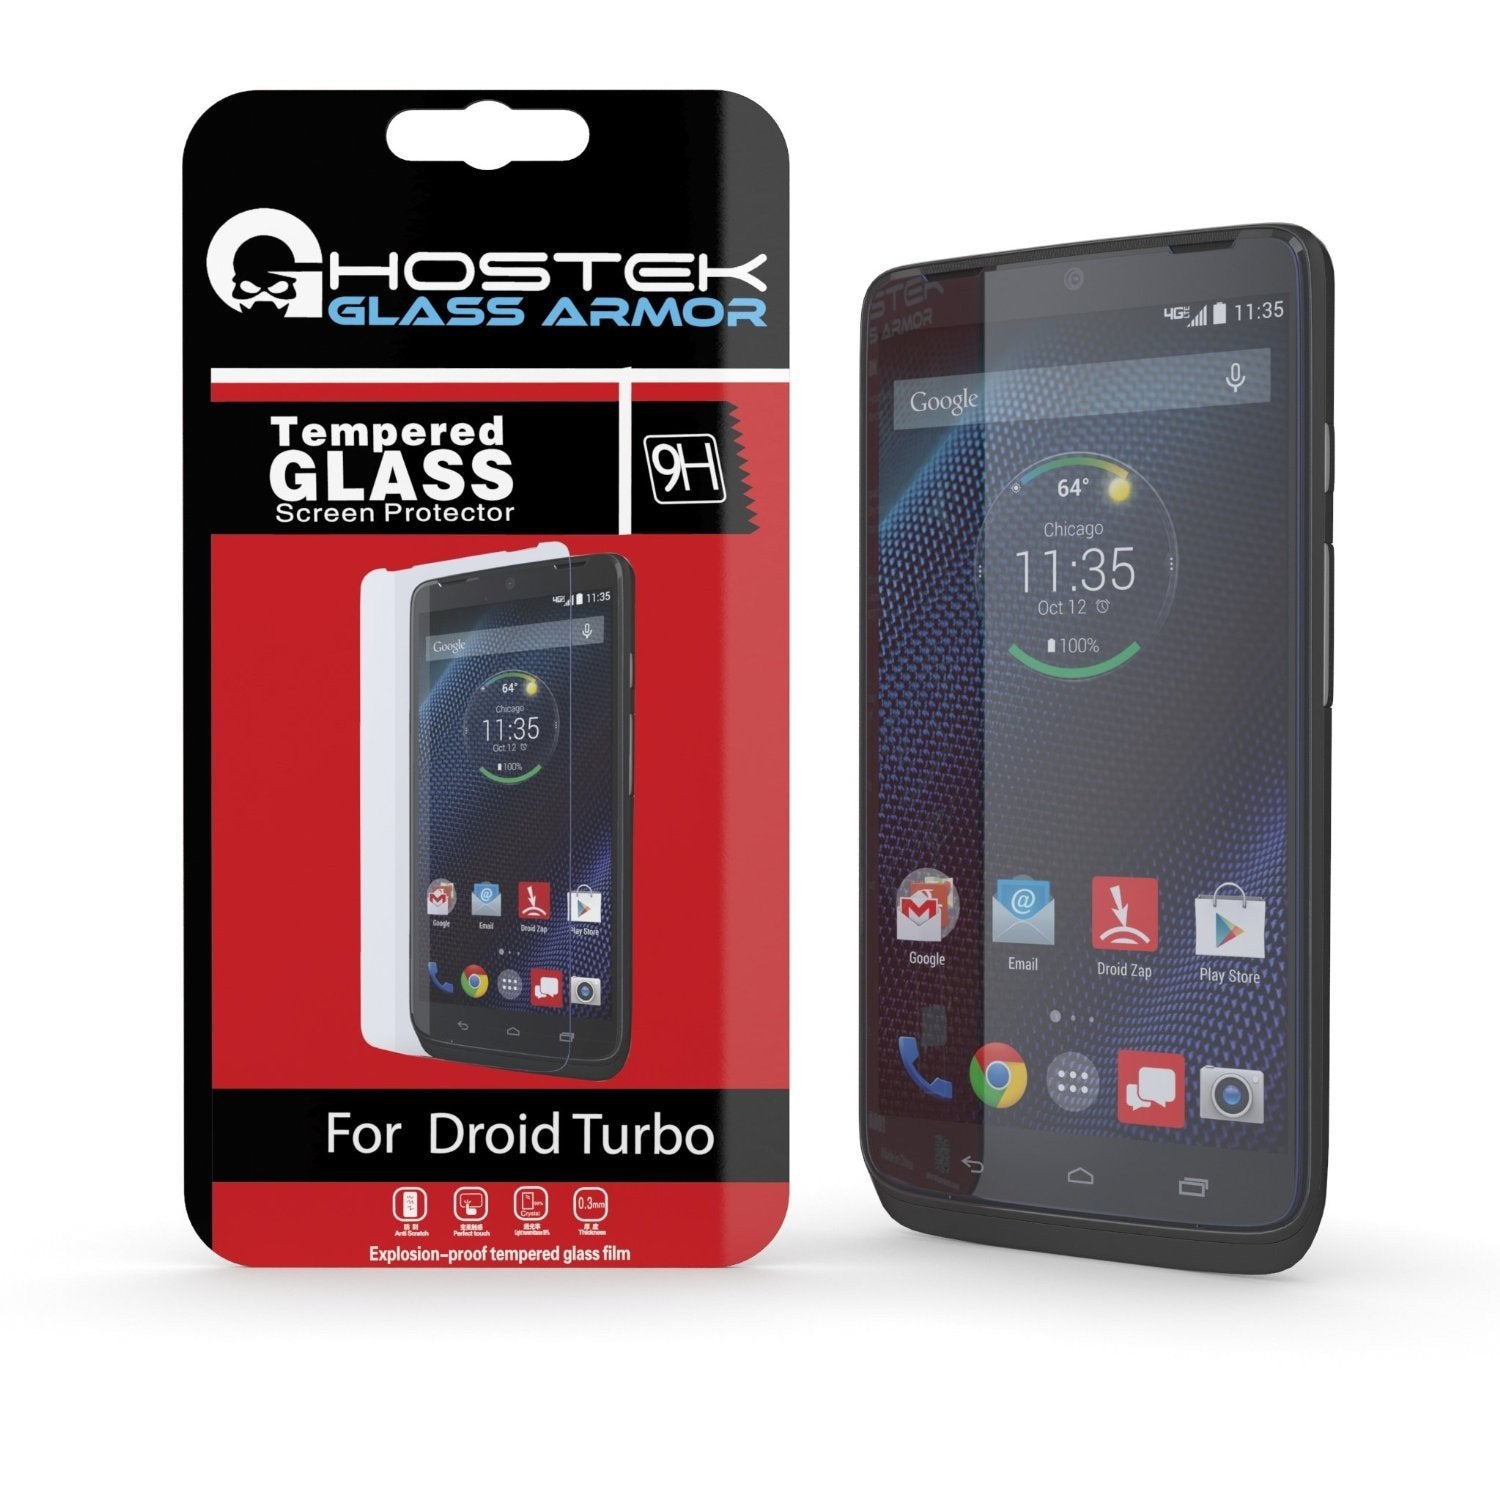 Motorola DROID TURBO Screen Protector, Ghostek Glass Armor Tempered Glass Protector 0.33mm Thick 9H